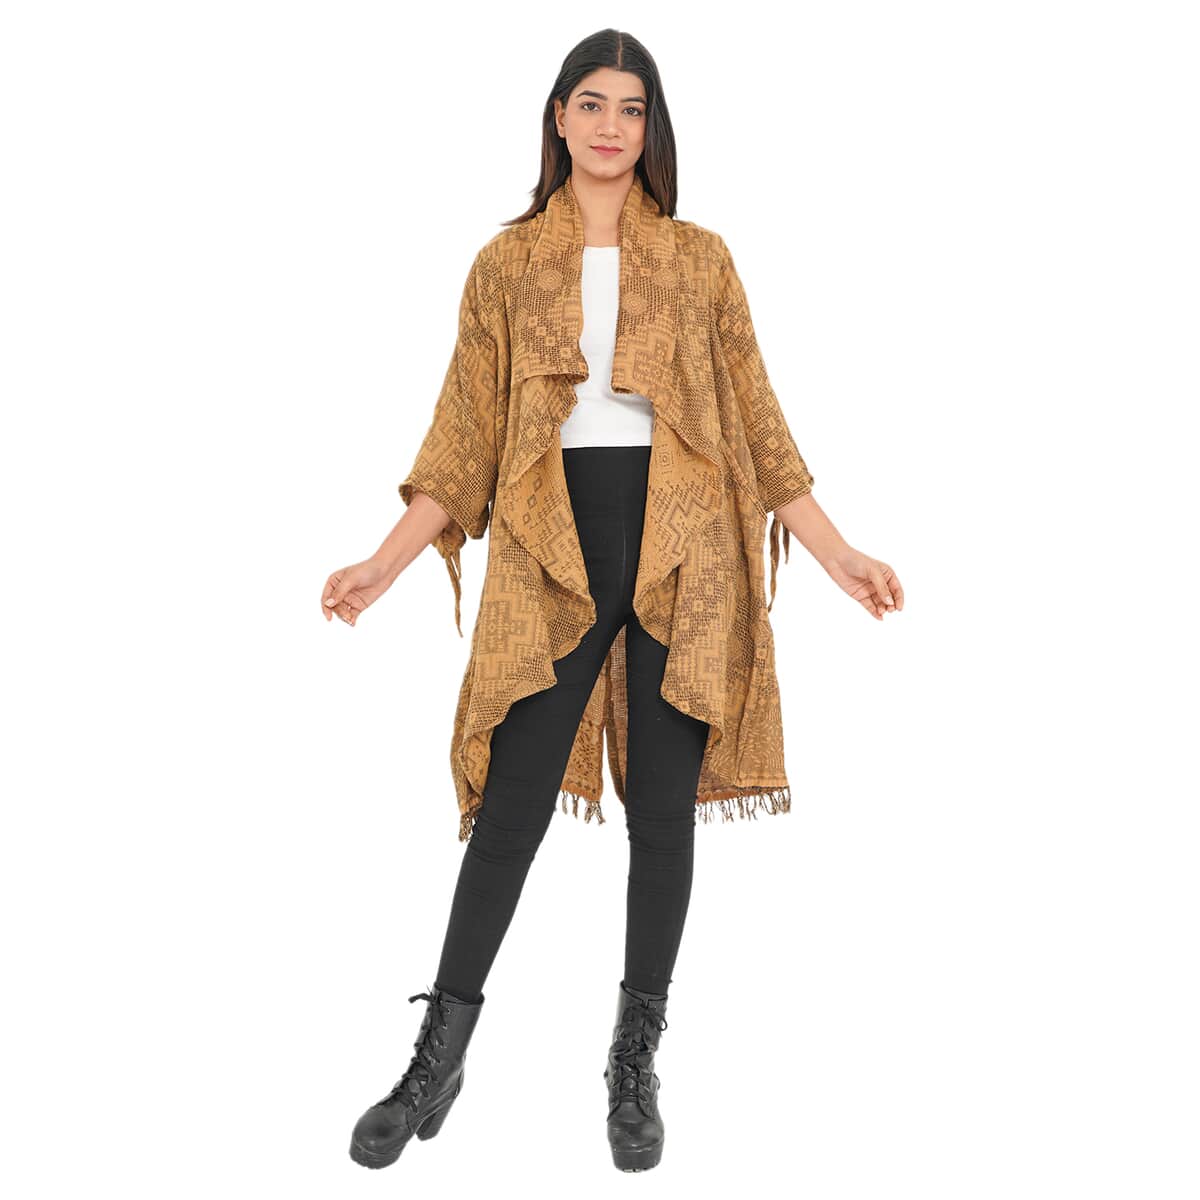 Passage Gold 100% Cotton Double Layer Jacquard Front Waterfall Cardigan - One size Plus, Cotton Cardigan, Women Cardigan, Maxi Cardigan, Summer Cardigan image number 0